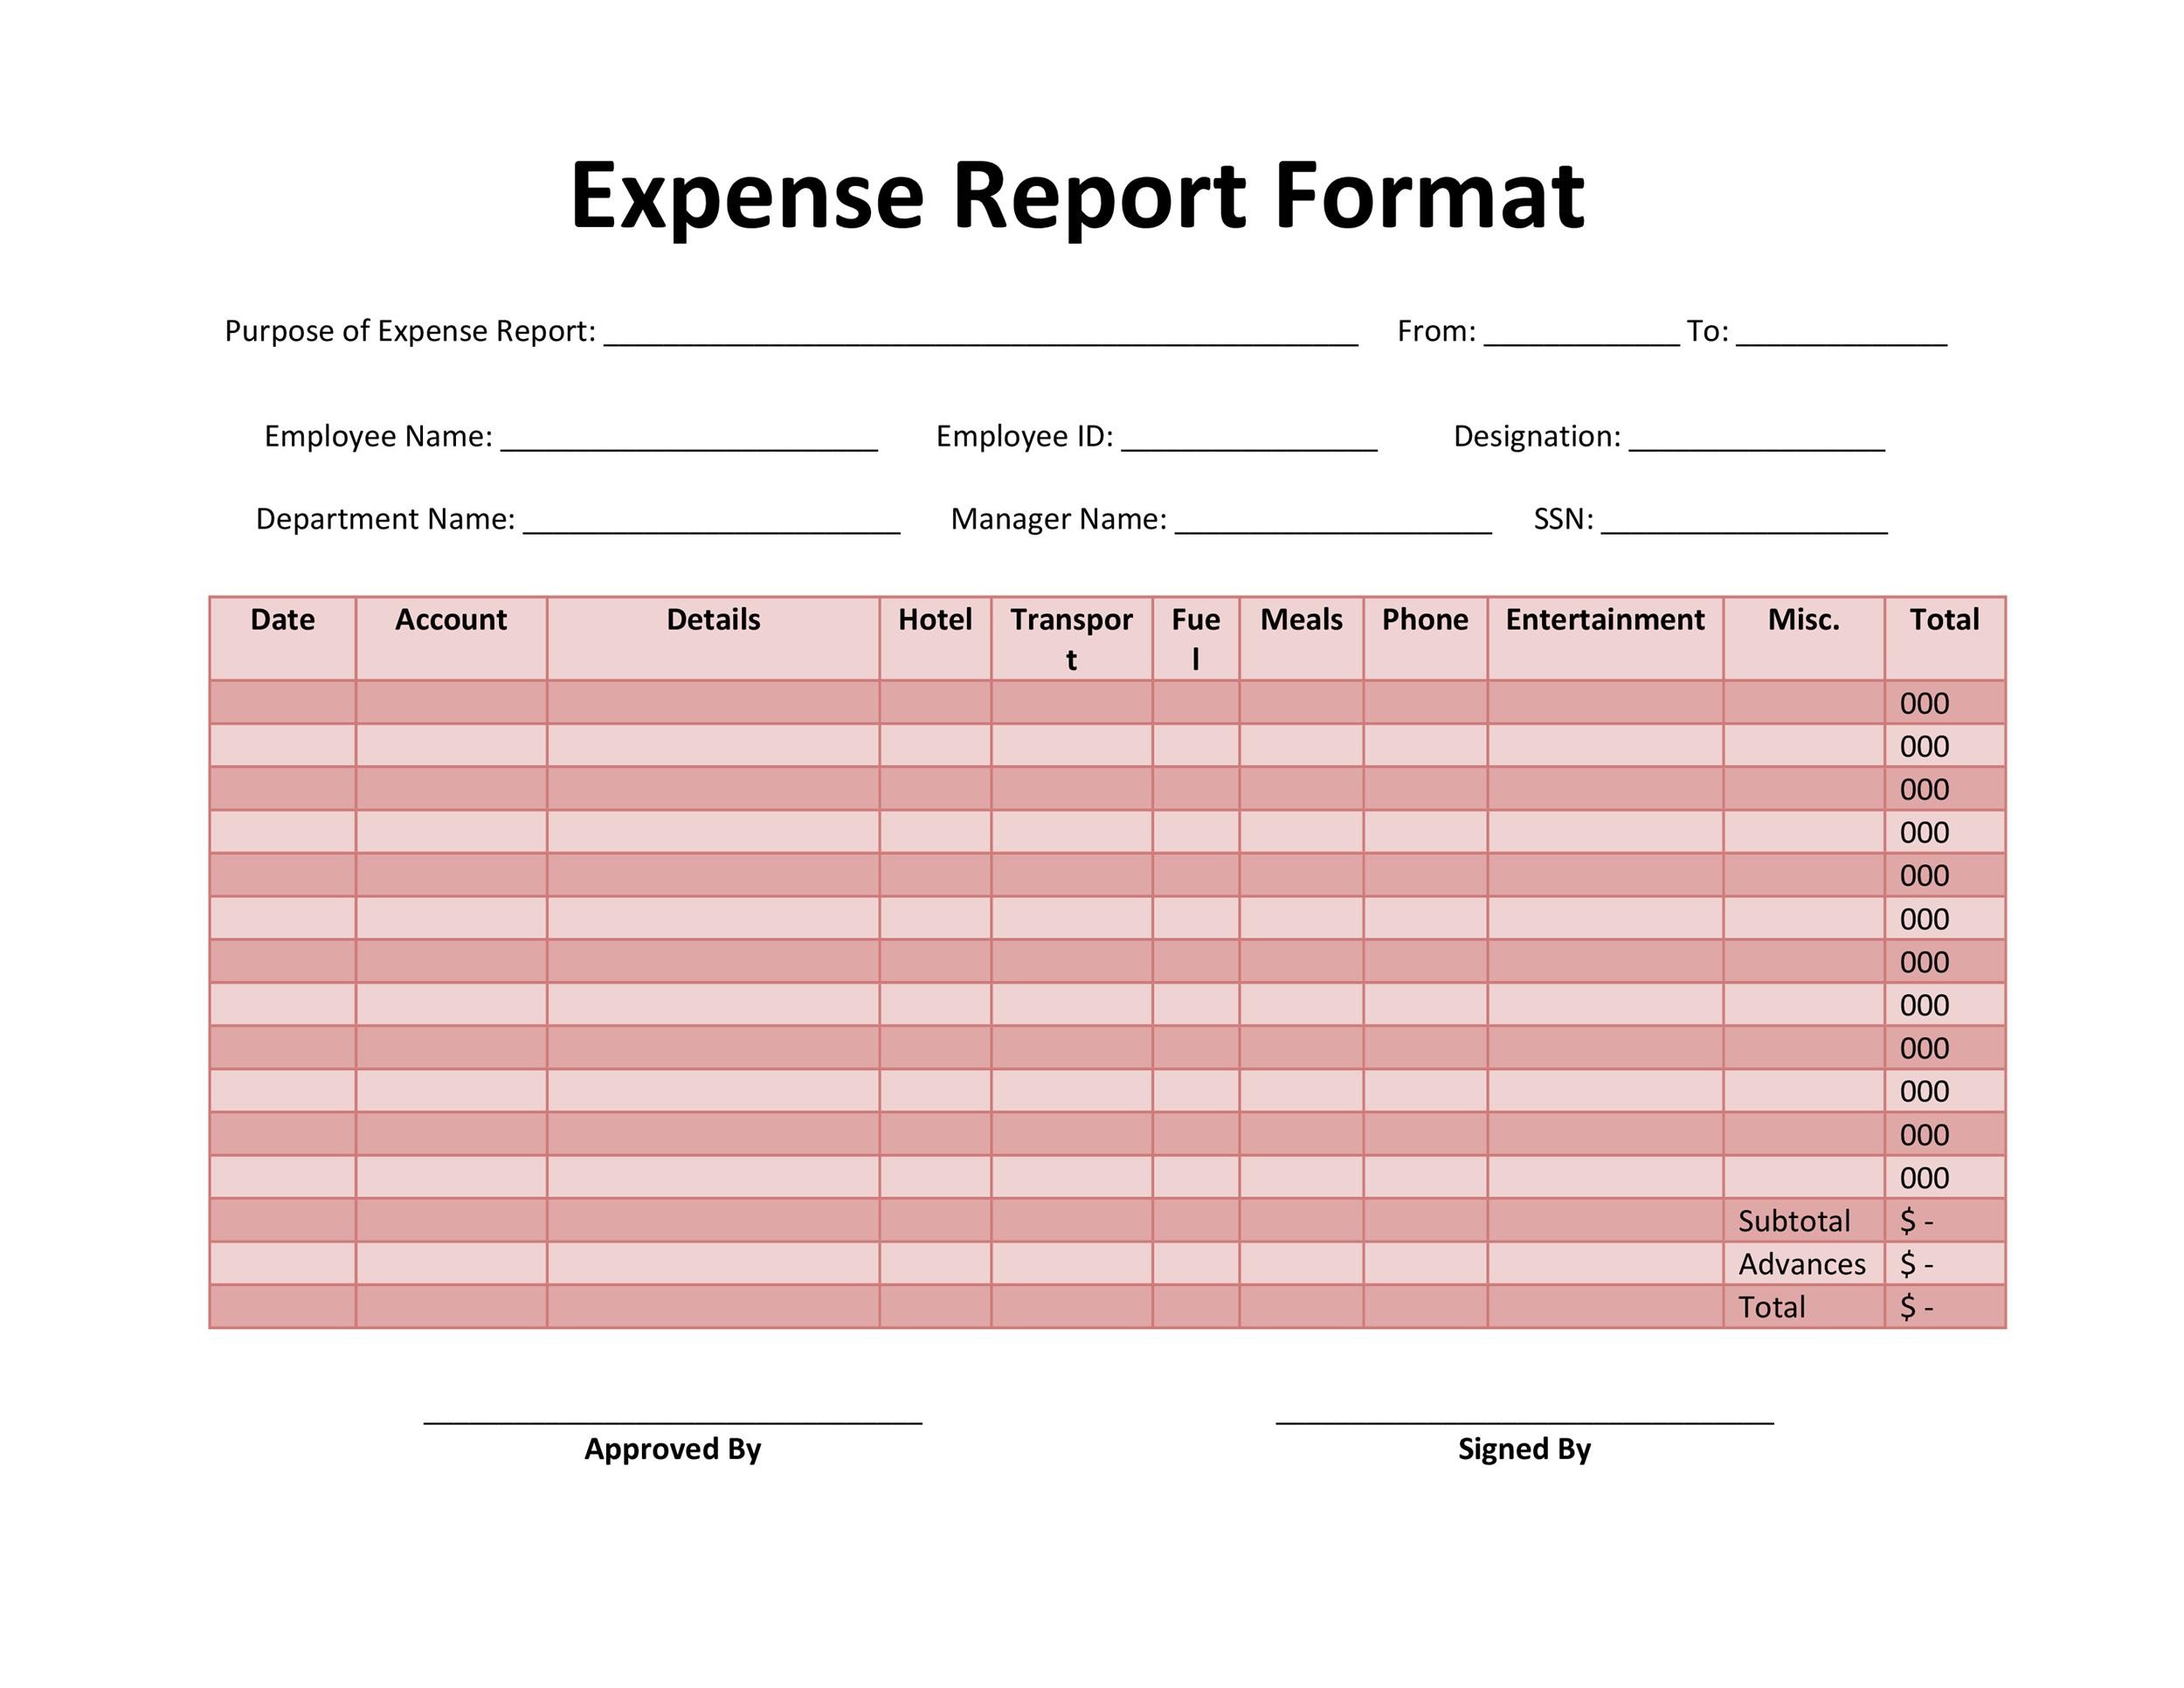 40+ Expense Report Templates to Help you Save Money Template Lab